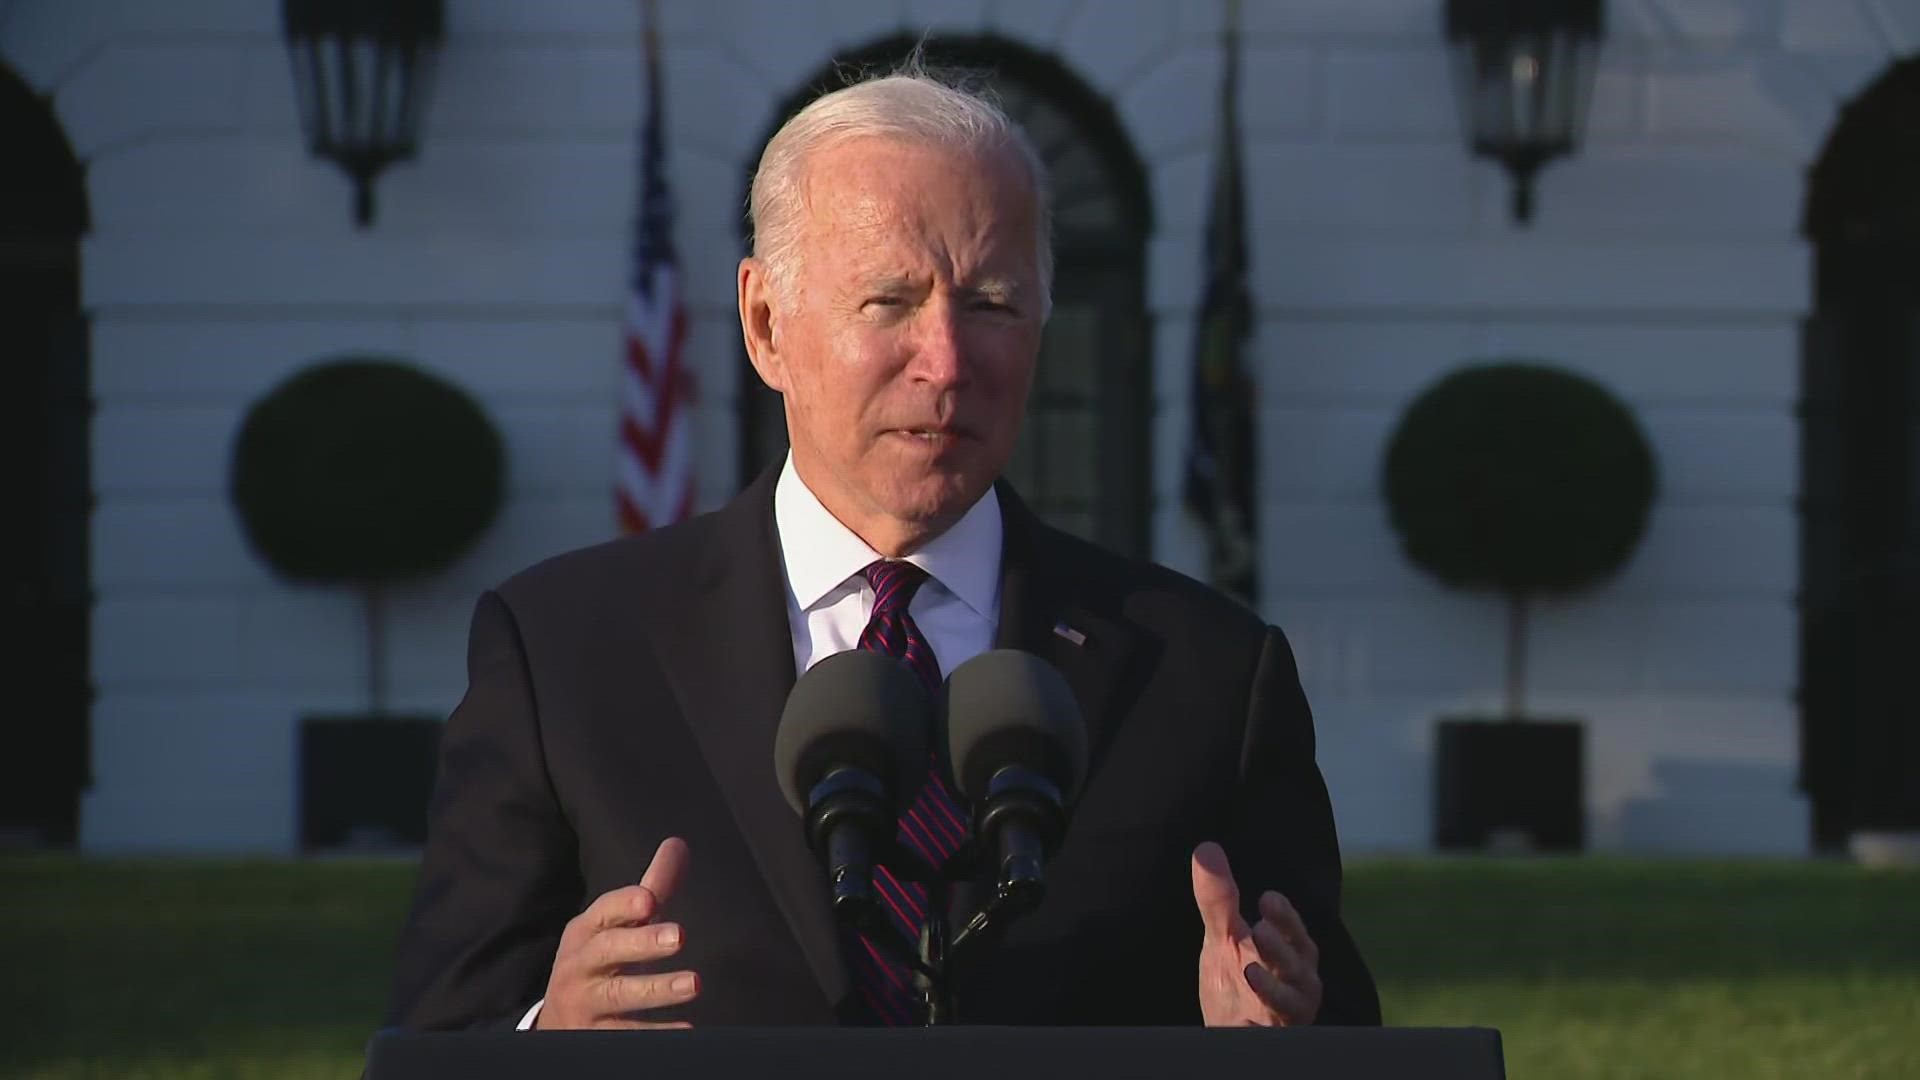 President Joe Biden said Monday that his $1 trillion infrastructure deal is proof Democrats and Republicans can come together and deliver results.